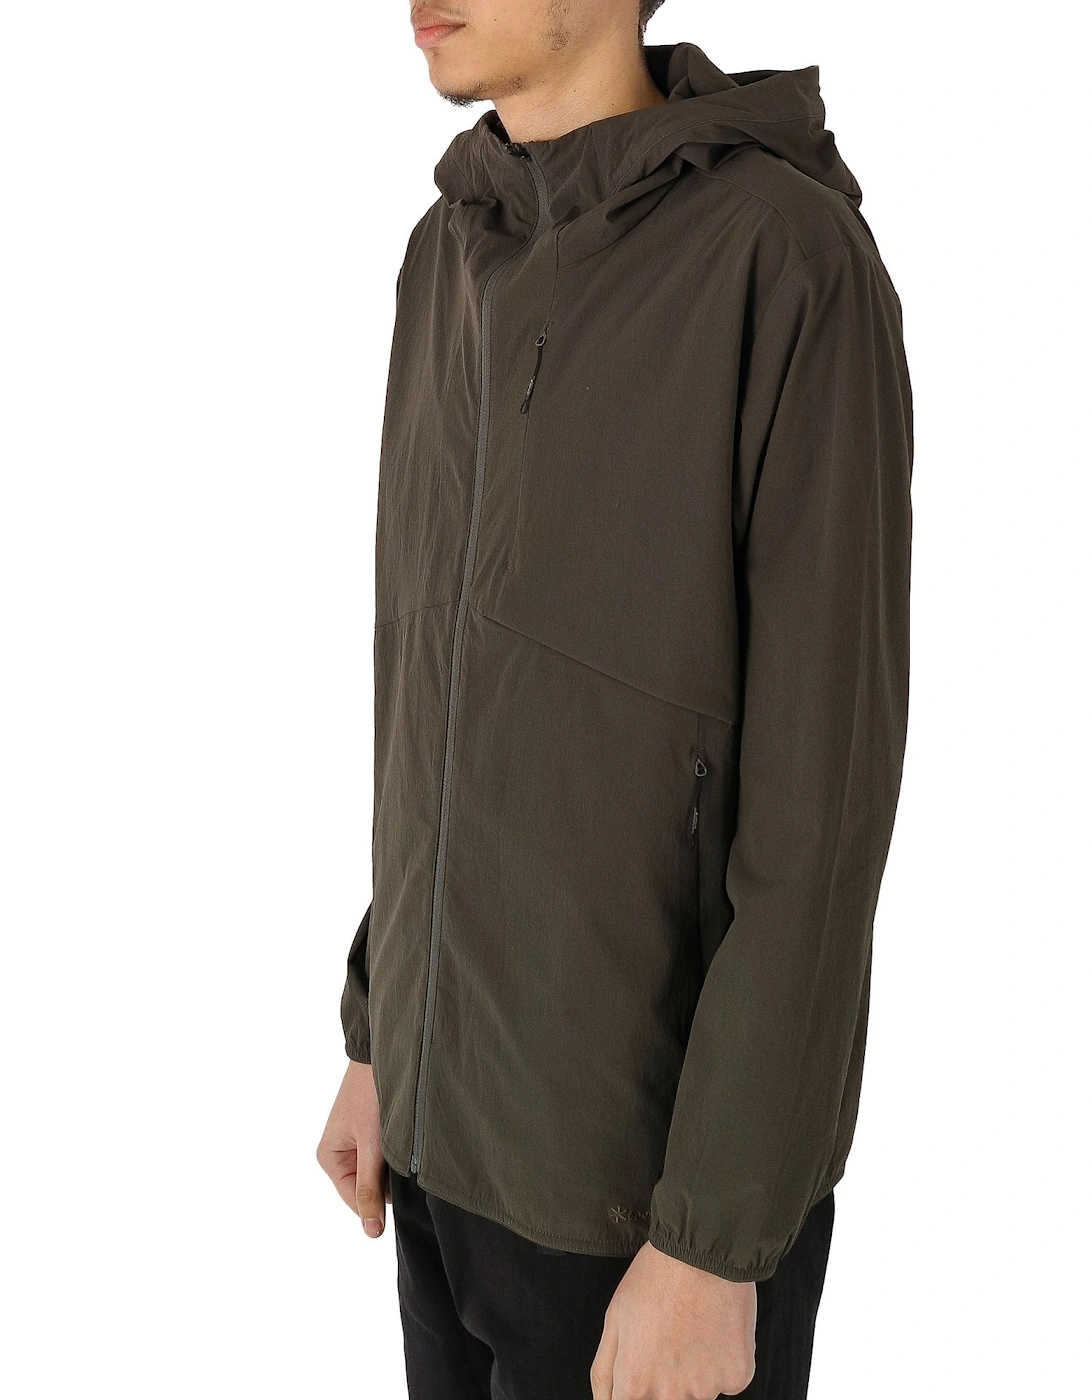 Active Hooded Green Jacket